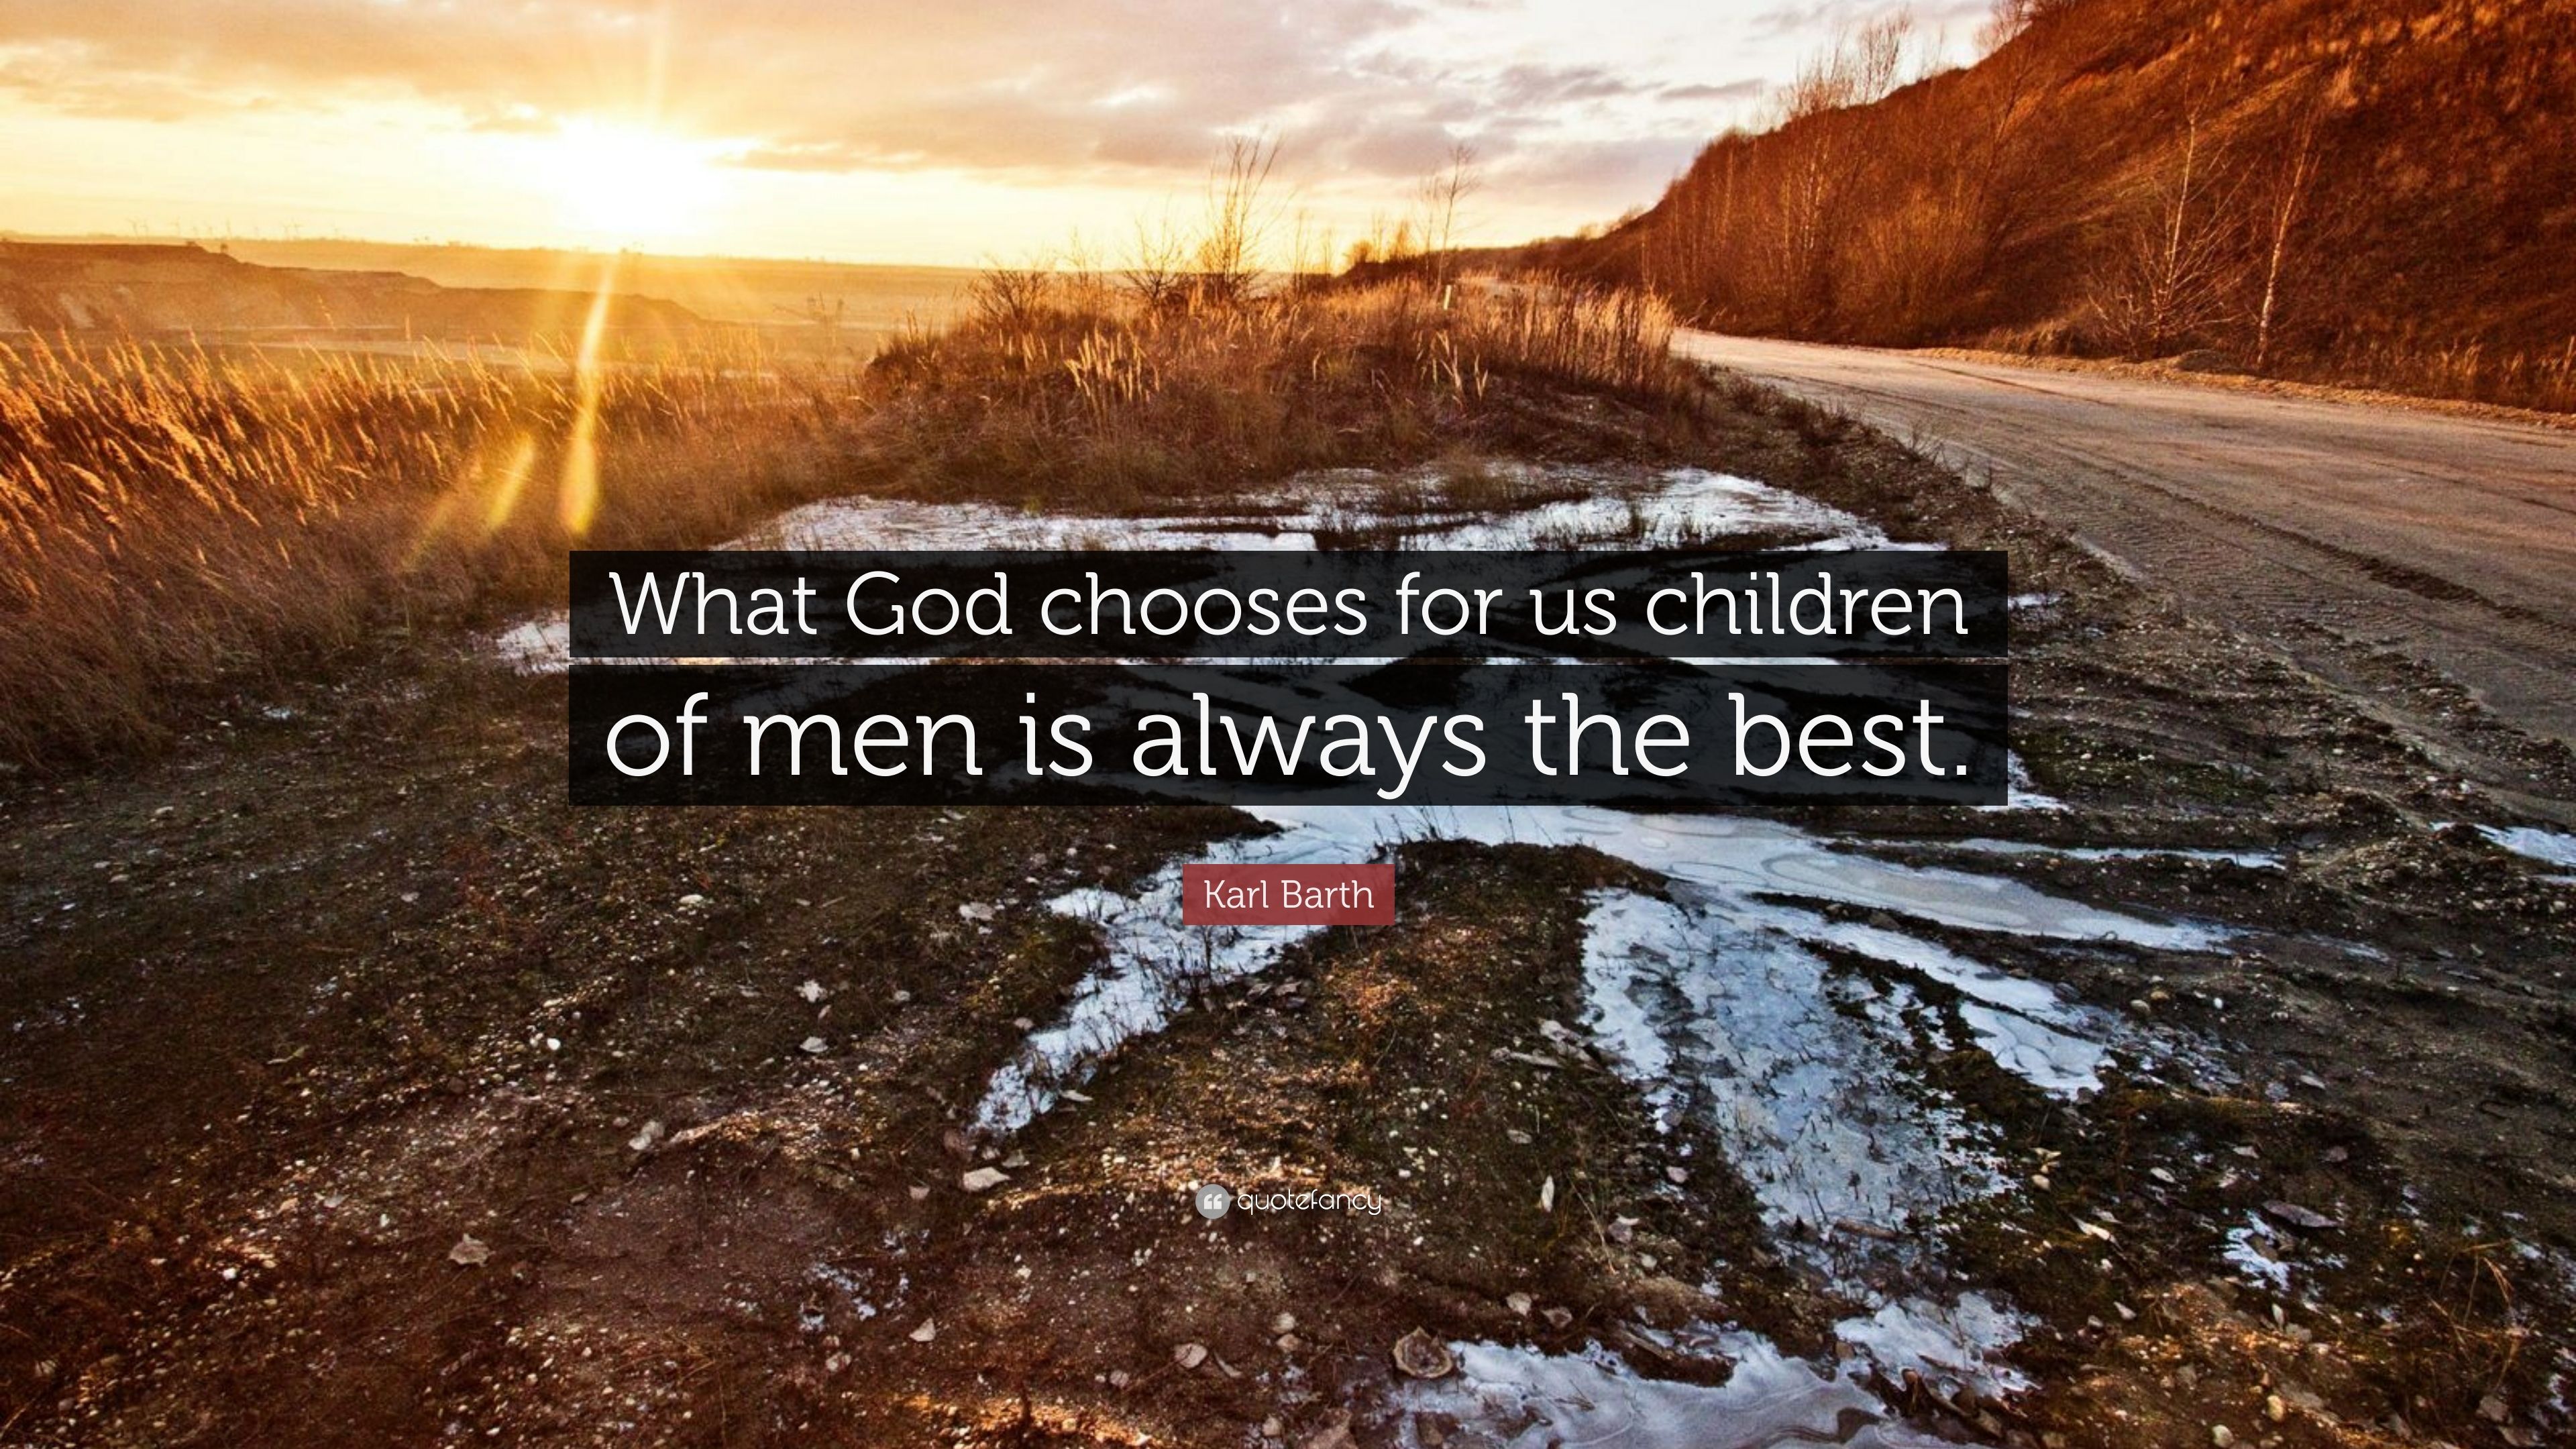 Karl Barth Quote: “What God chooses for us children of men is